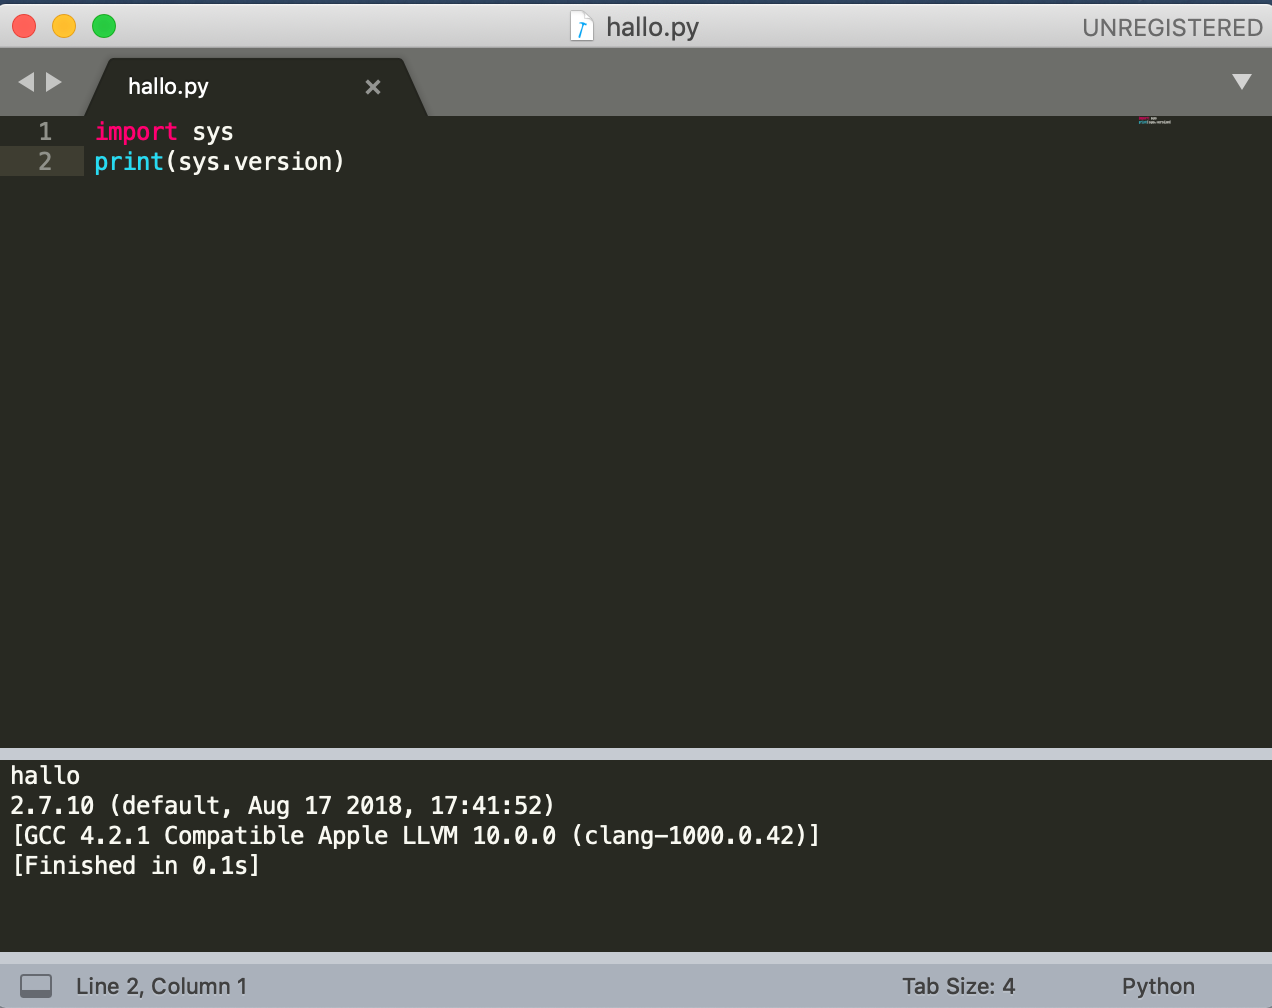 download install sublime merge python